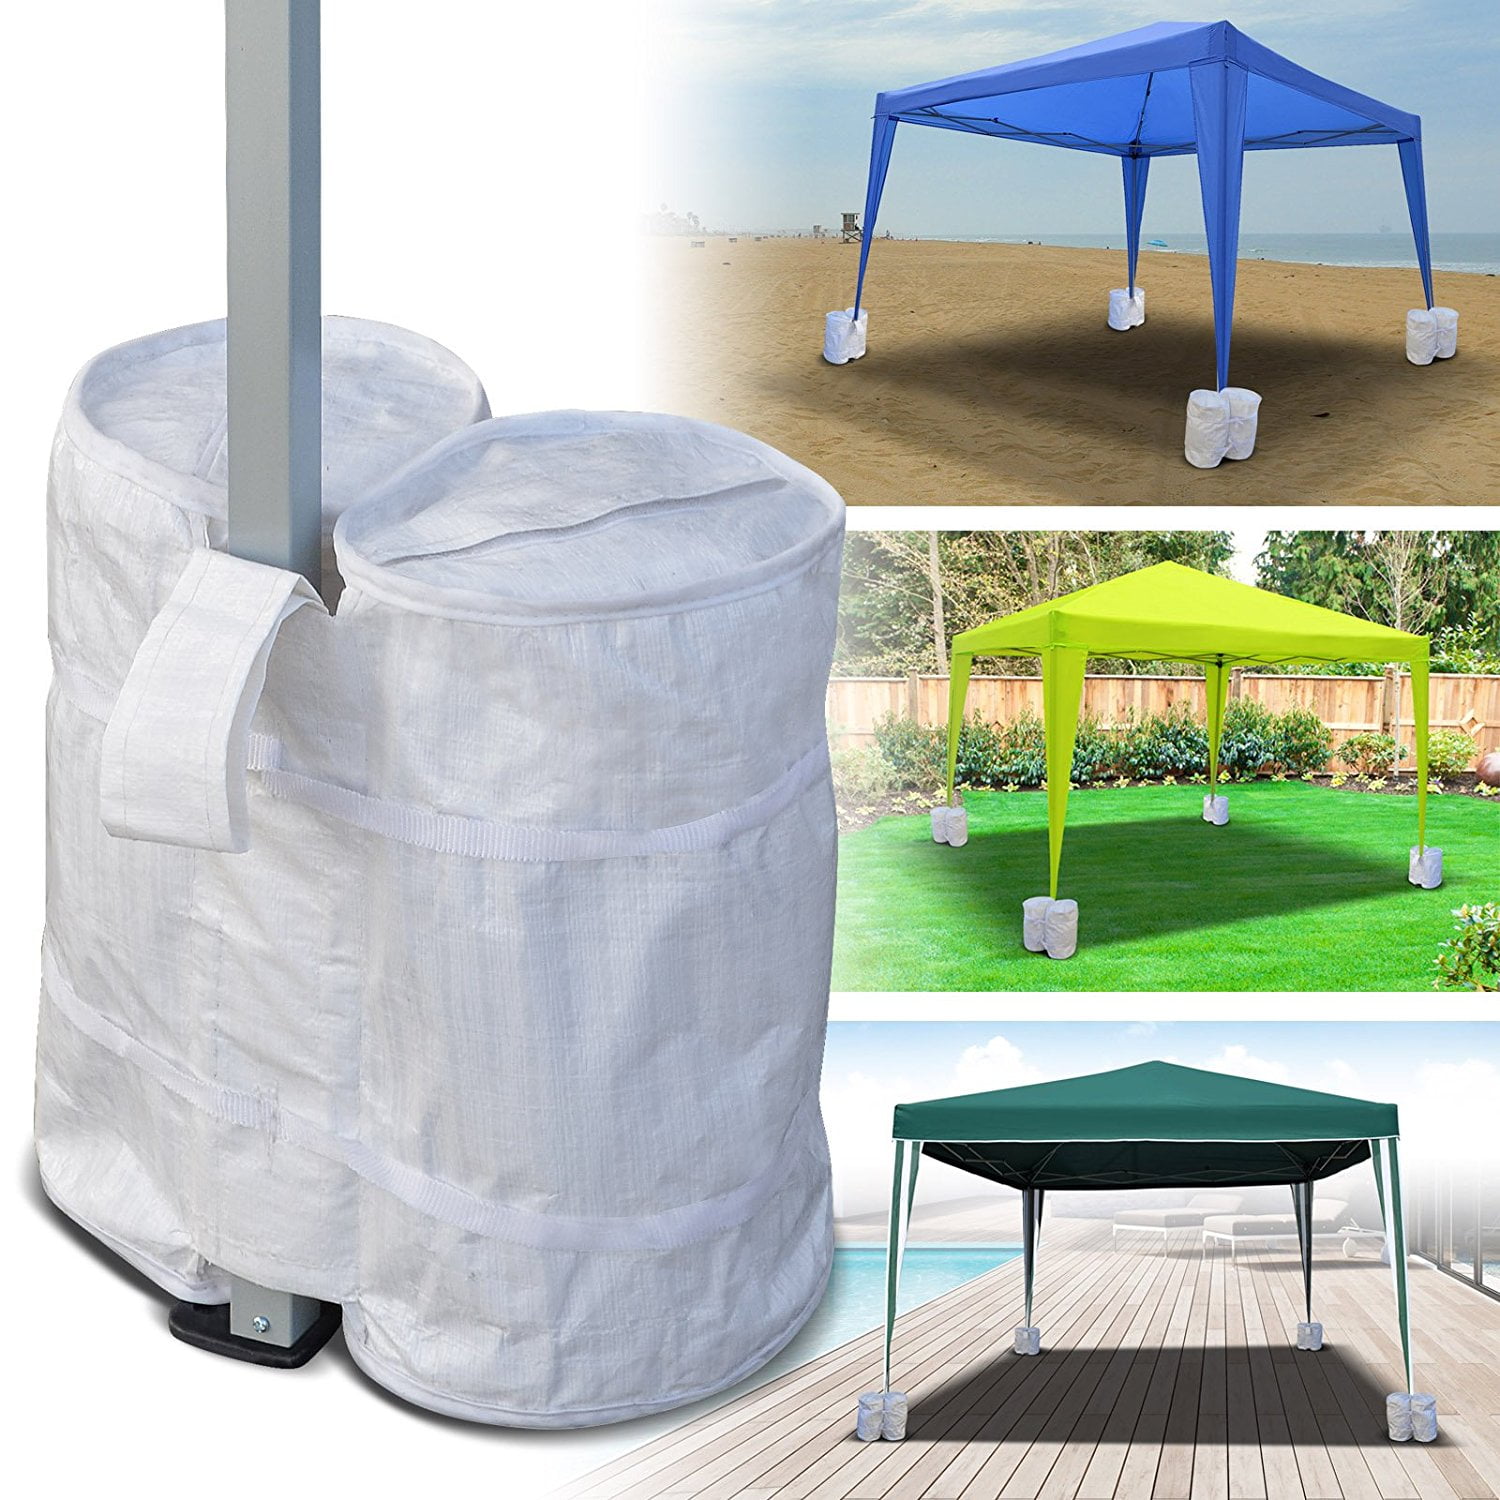 New Gazebo Weight Sand Bag Anchor Bags Leg Weights Marquee Tent Canopy 